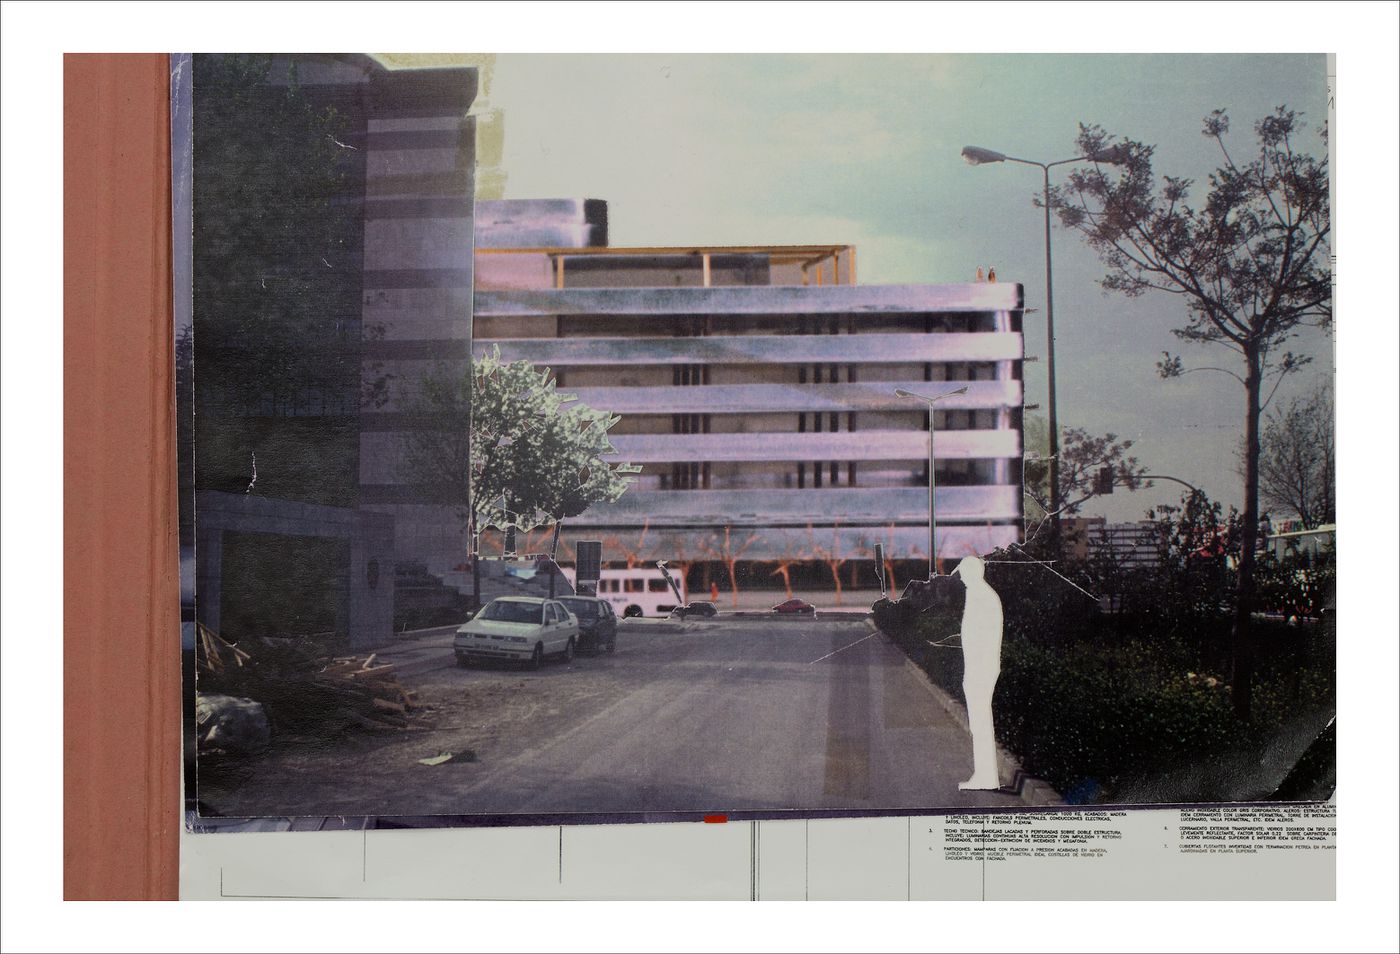 Proofs of Relevance: View of a photomontage showing the Savings Bank of Granada, Abalos & Herreros (1992), Granada, Spain